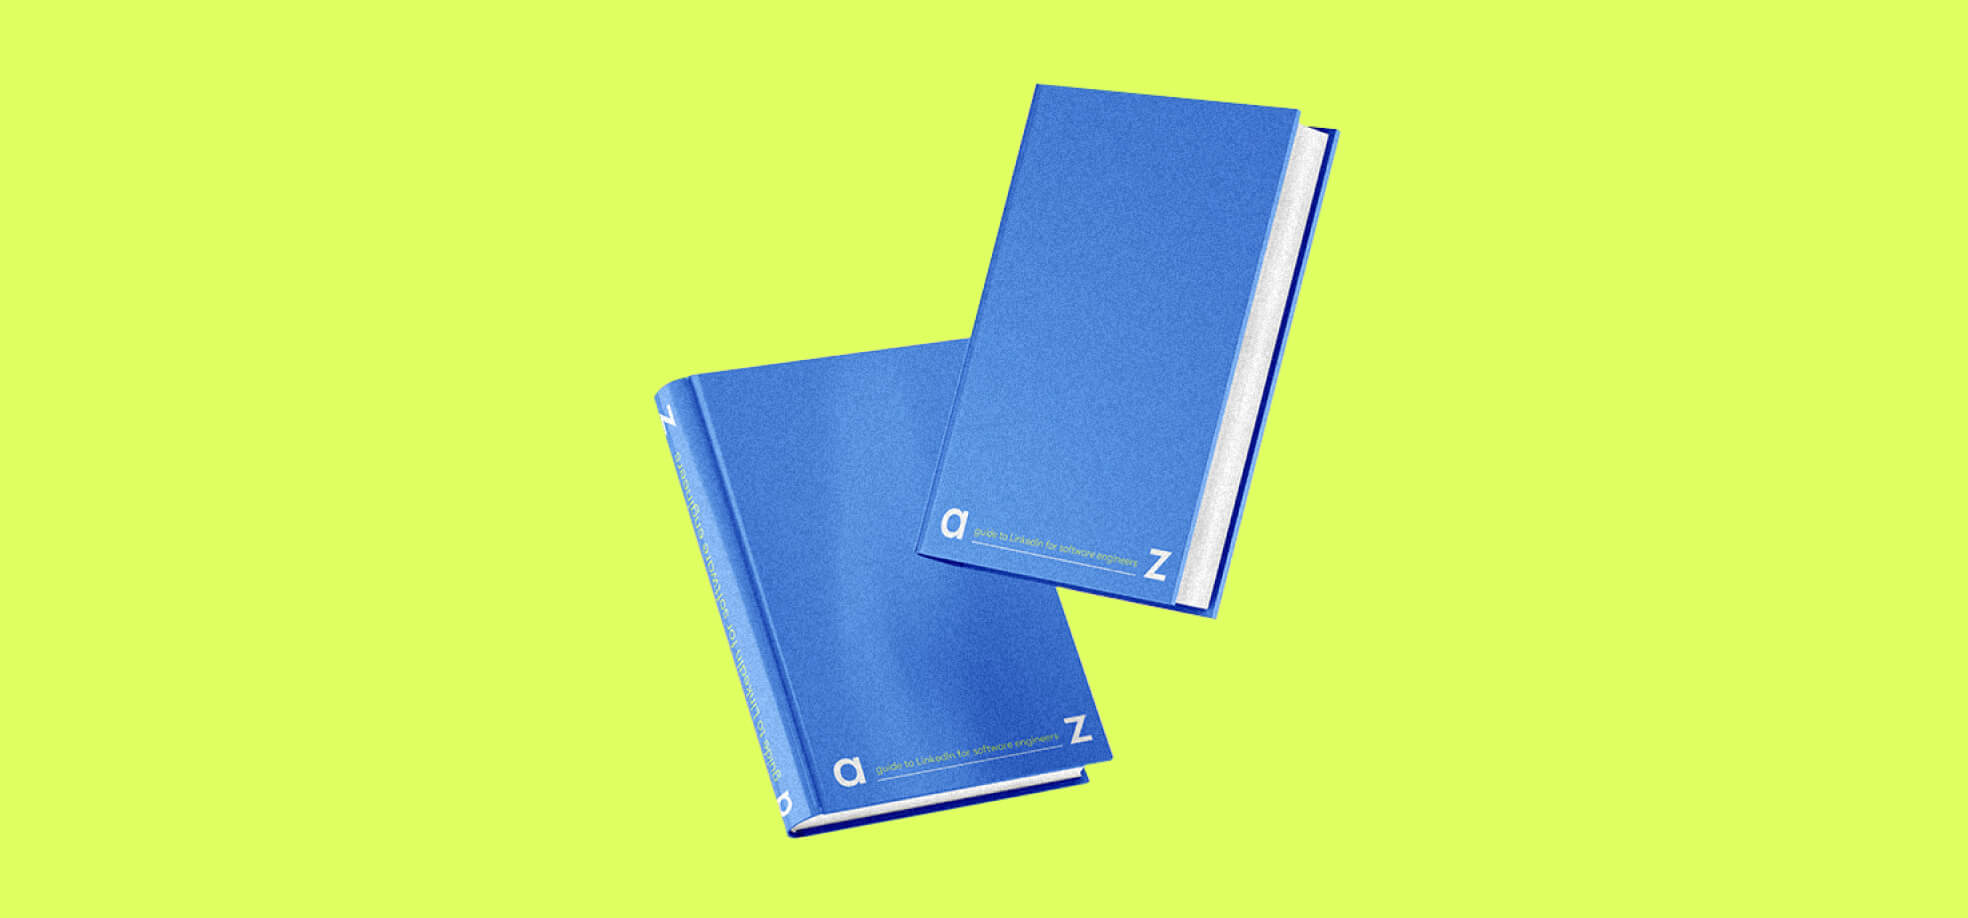 2 blue books illustration on a green background 